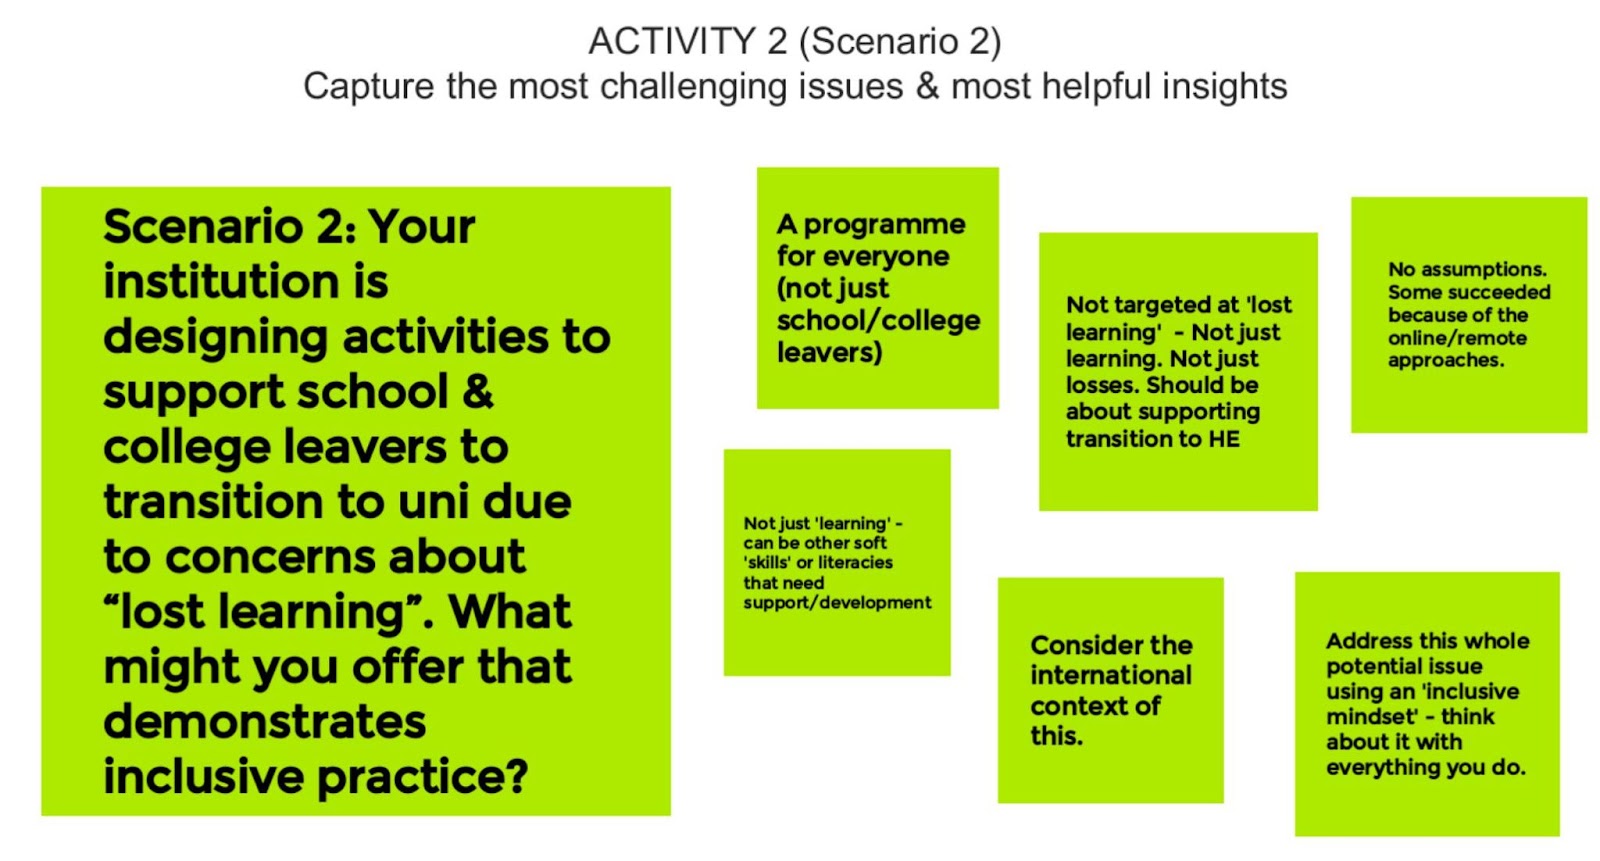 Post-its and text reflect suggestions to address the scenario of: offering activities that demonstrate inclusive practice to support school and college leavers to transition to uni that address "lost learning" concerns.